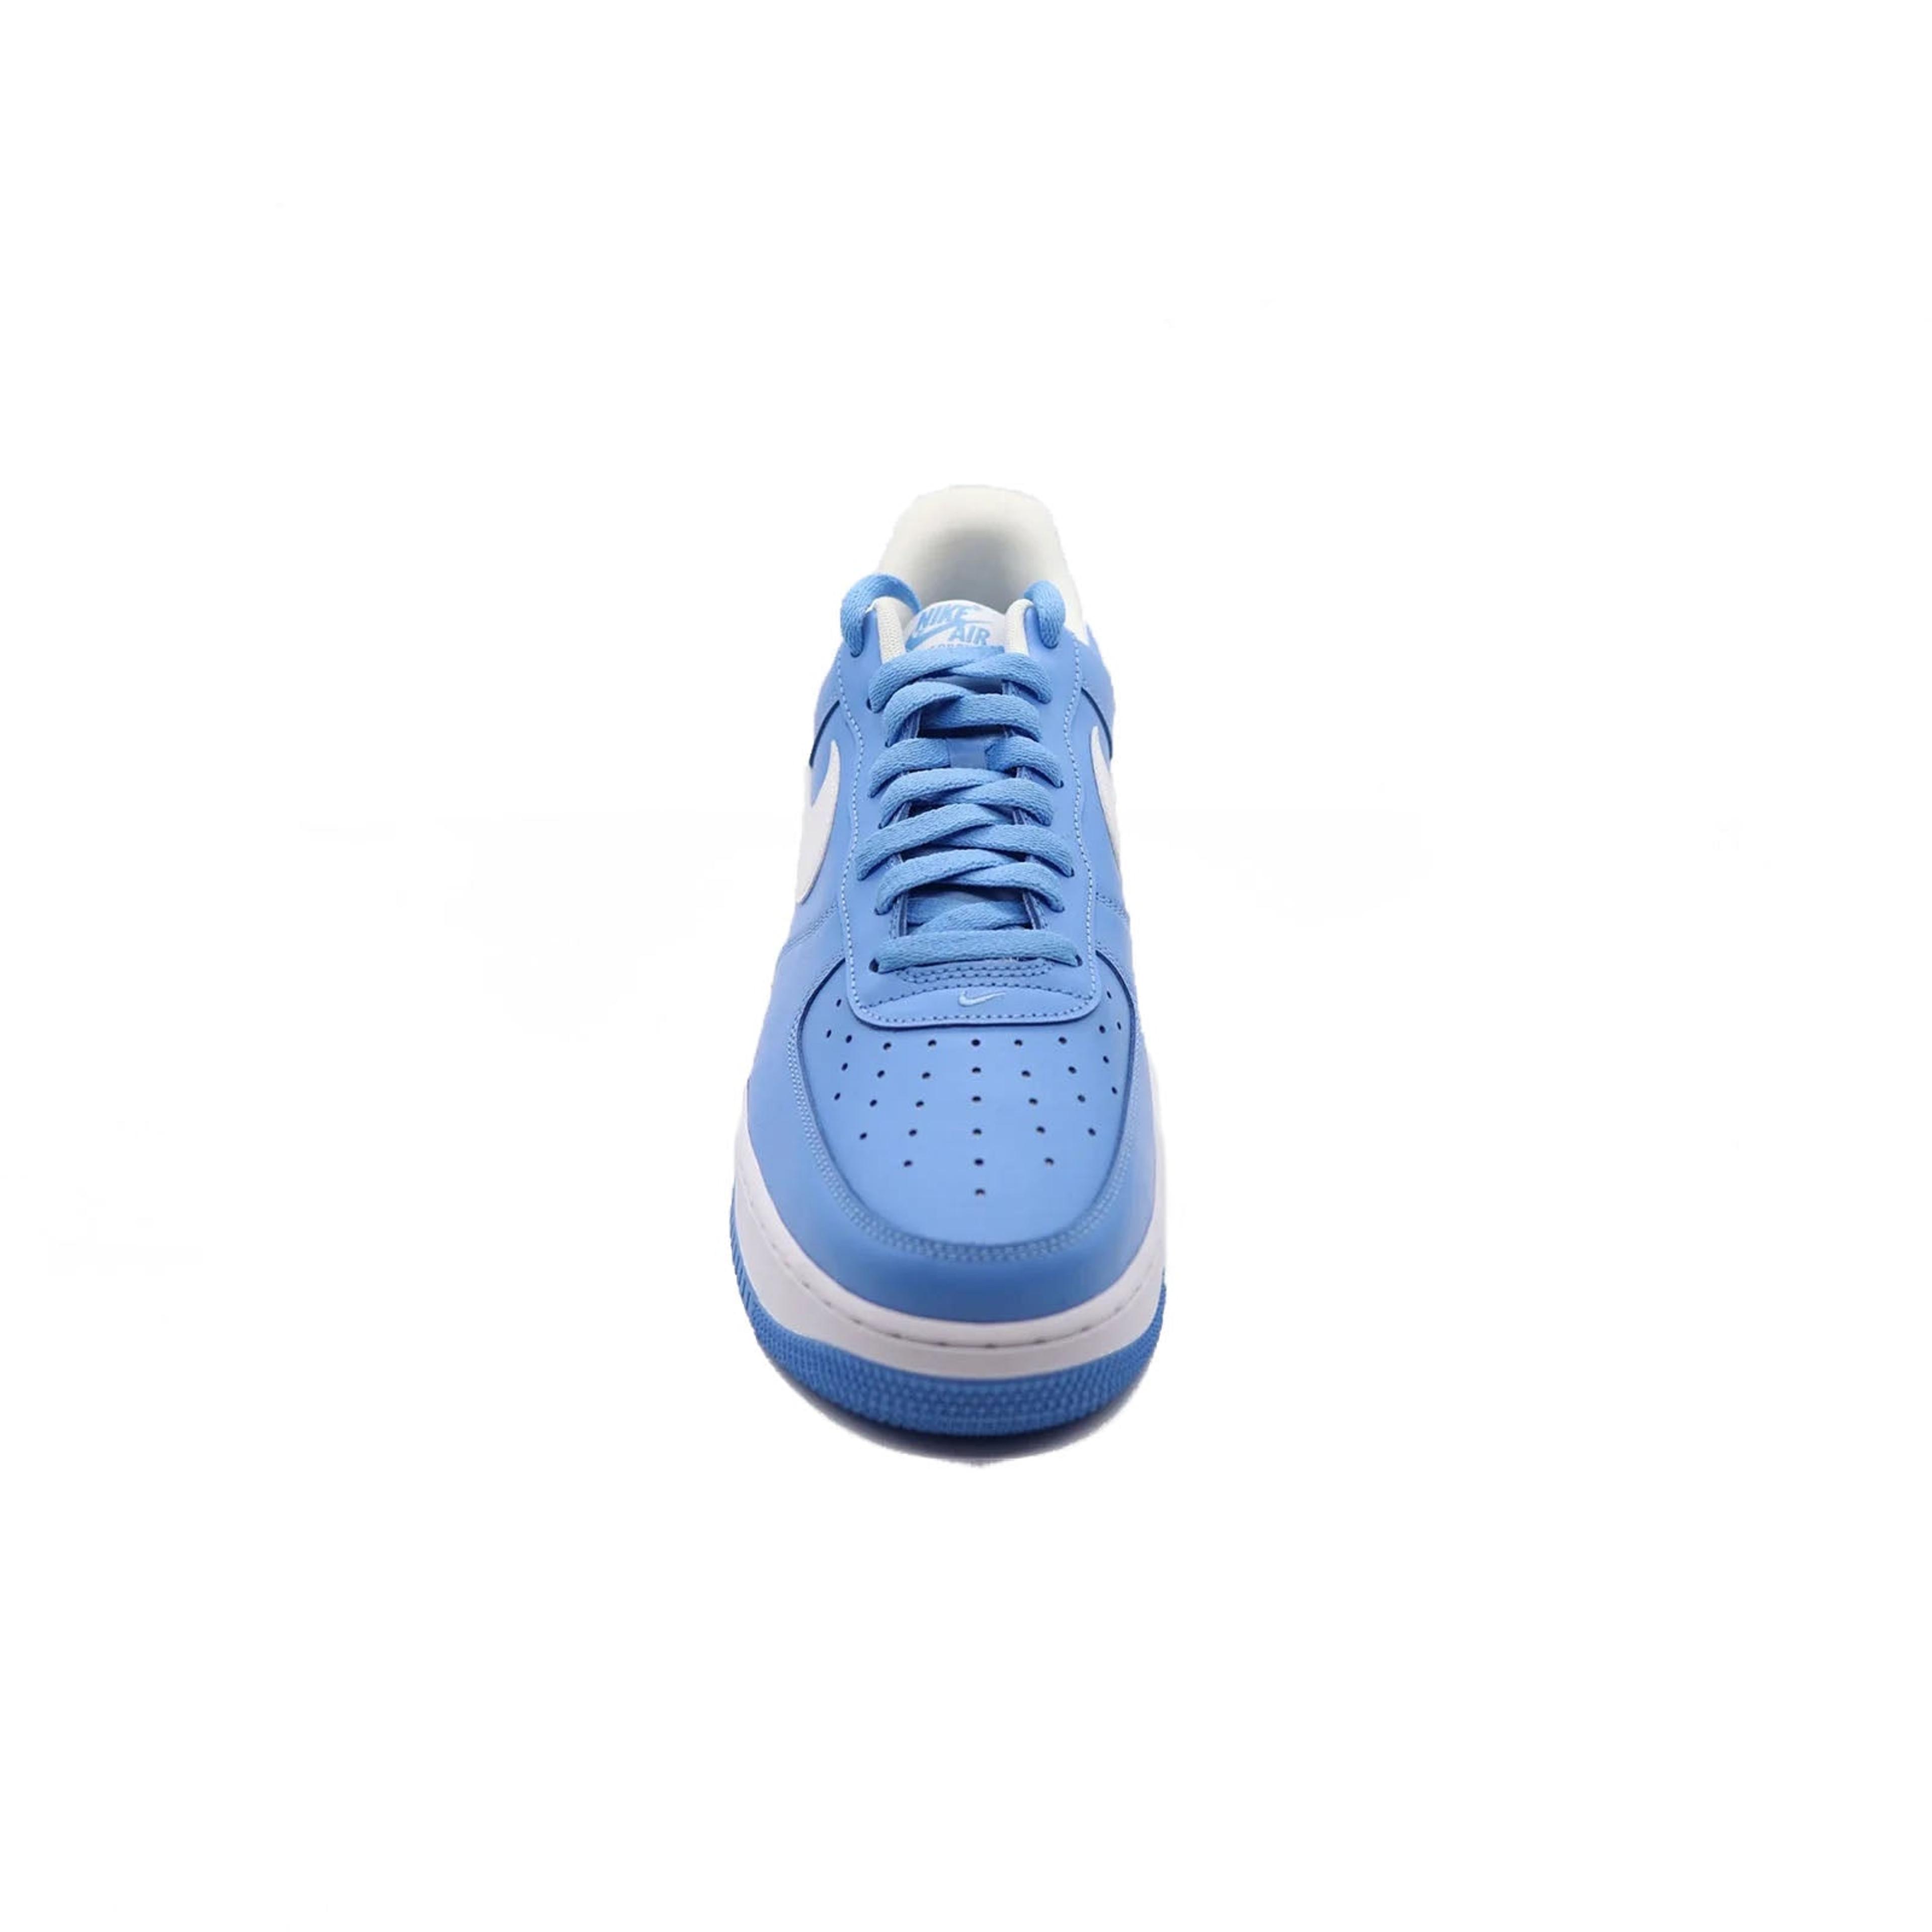 Alternate View 2 of Nike Air Force 1 Low, '07 University Blue White